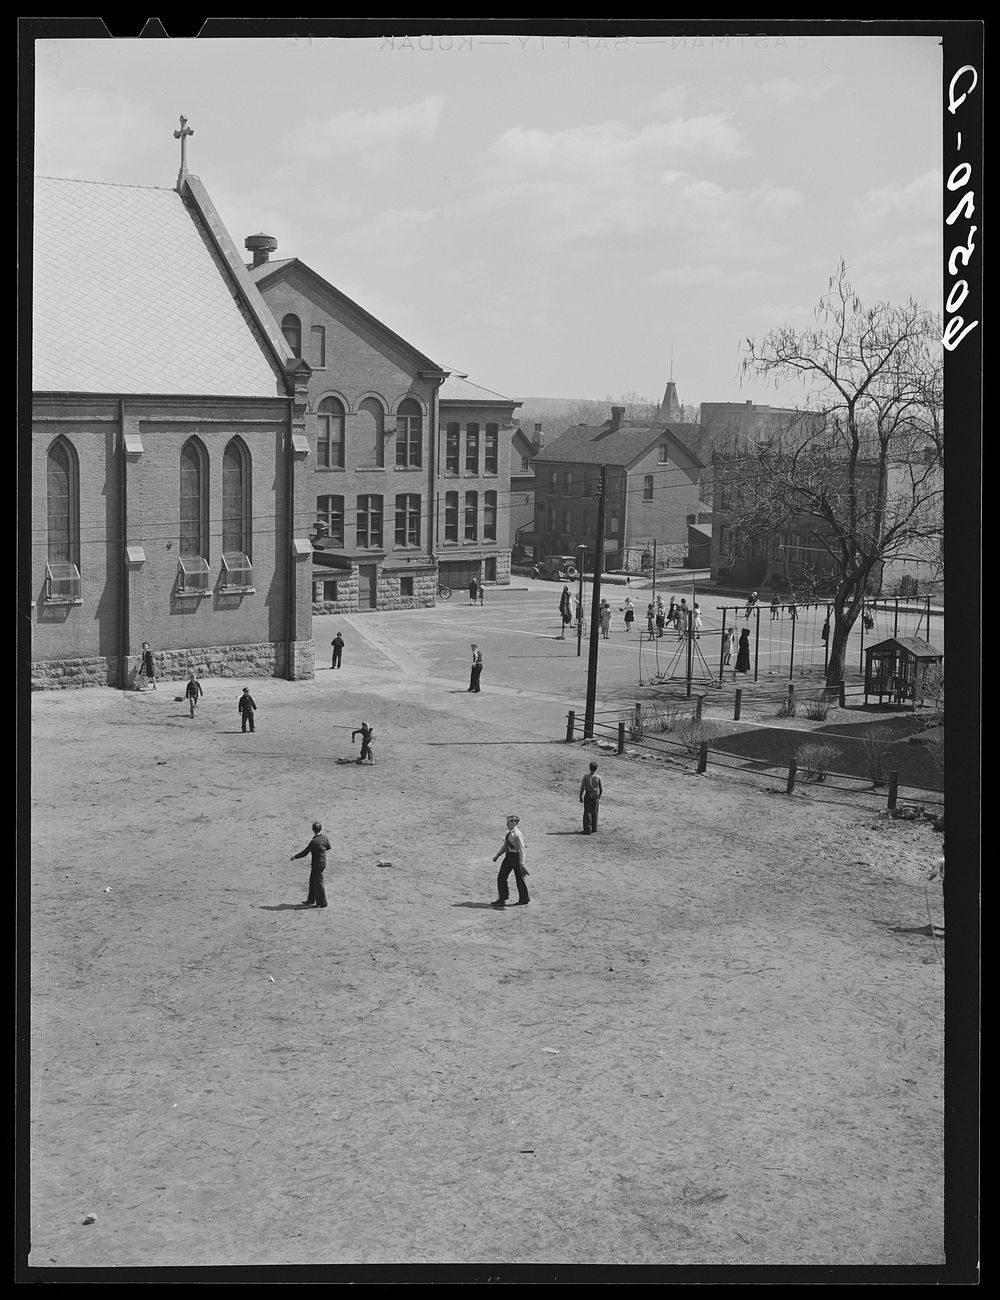 Catholic church and school yard. Dubuque, Iowa. Sourced from the Library of Congress.